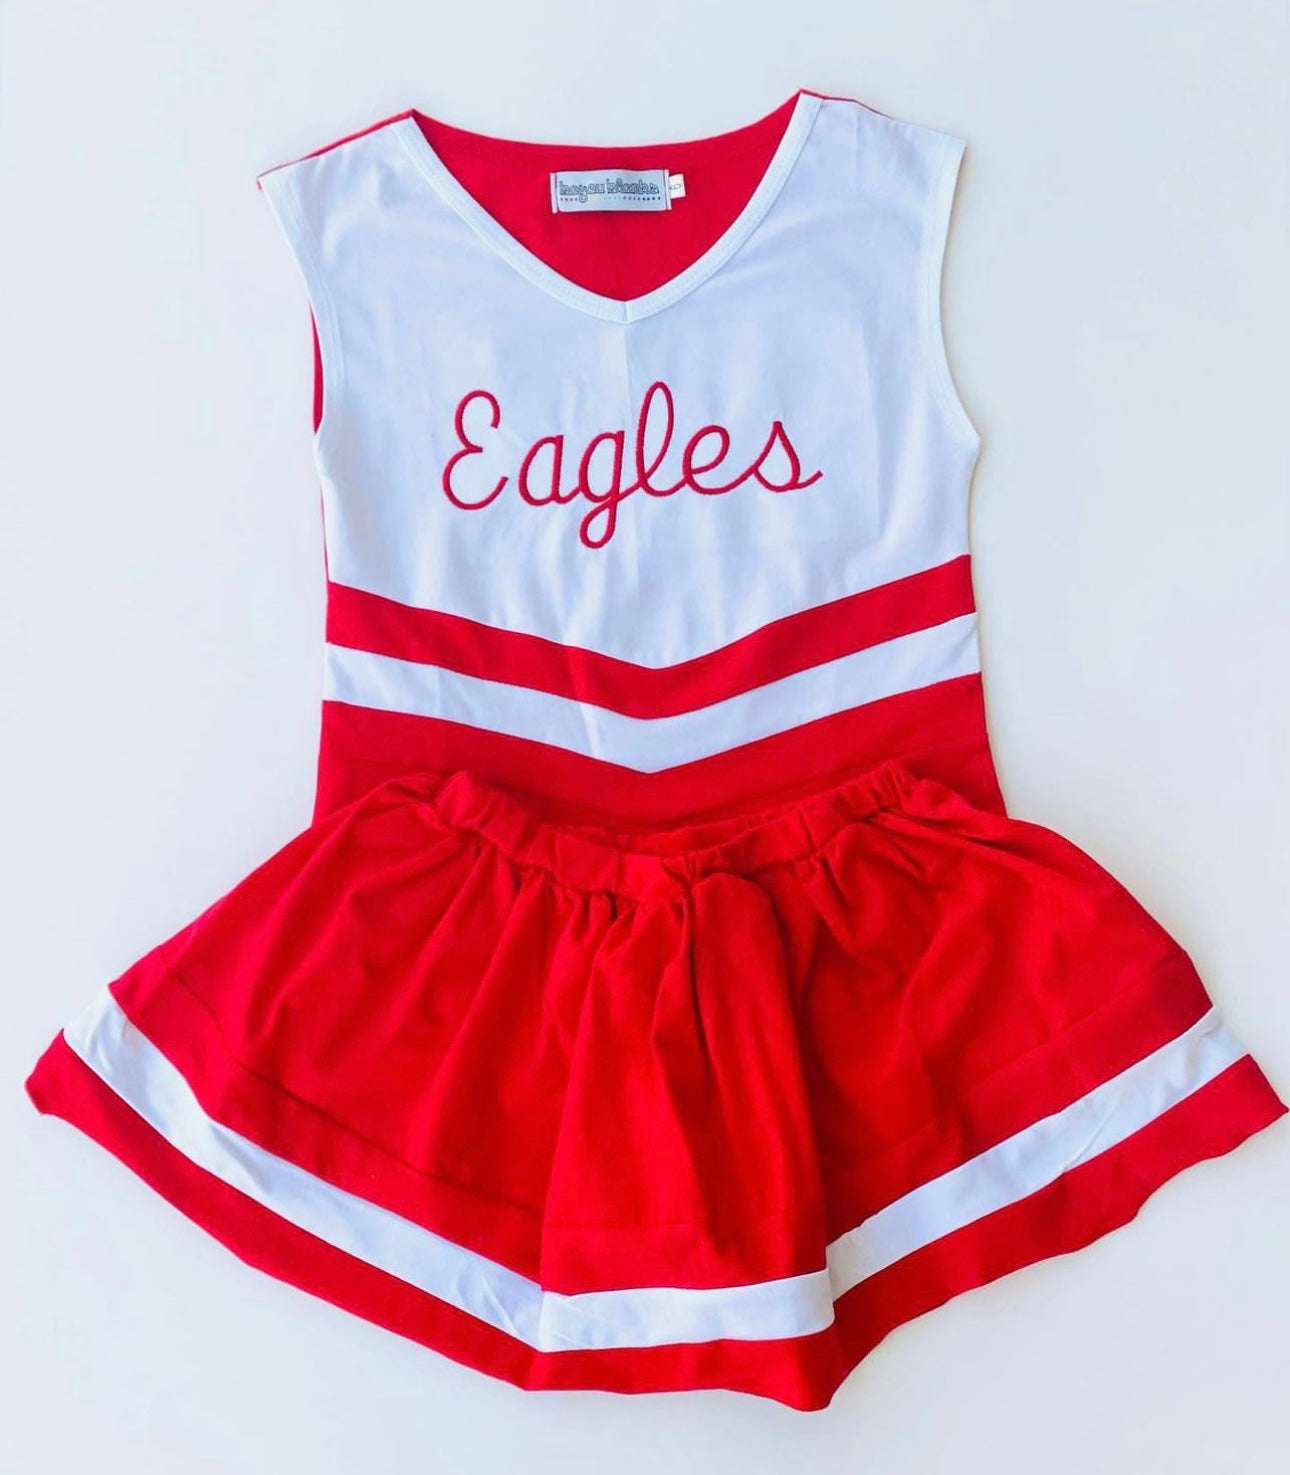 #2—Red/White Cheer Outfit